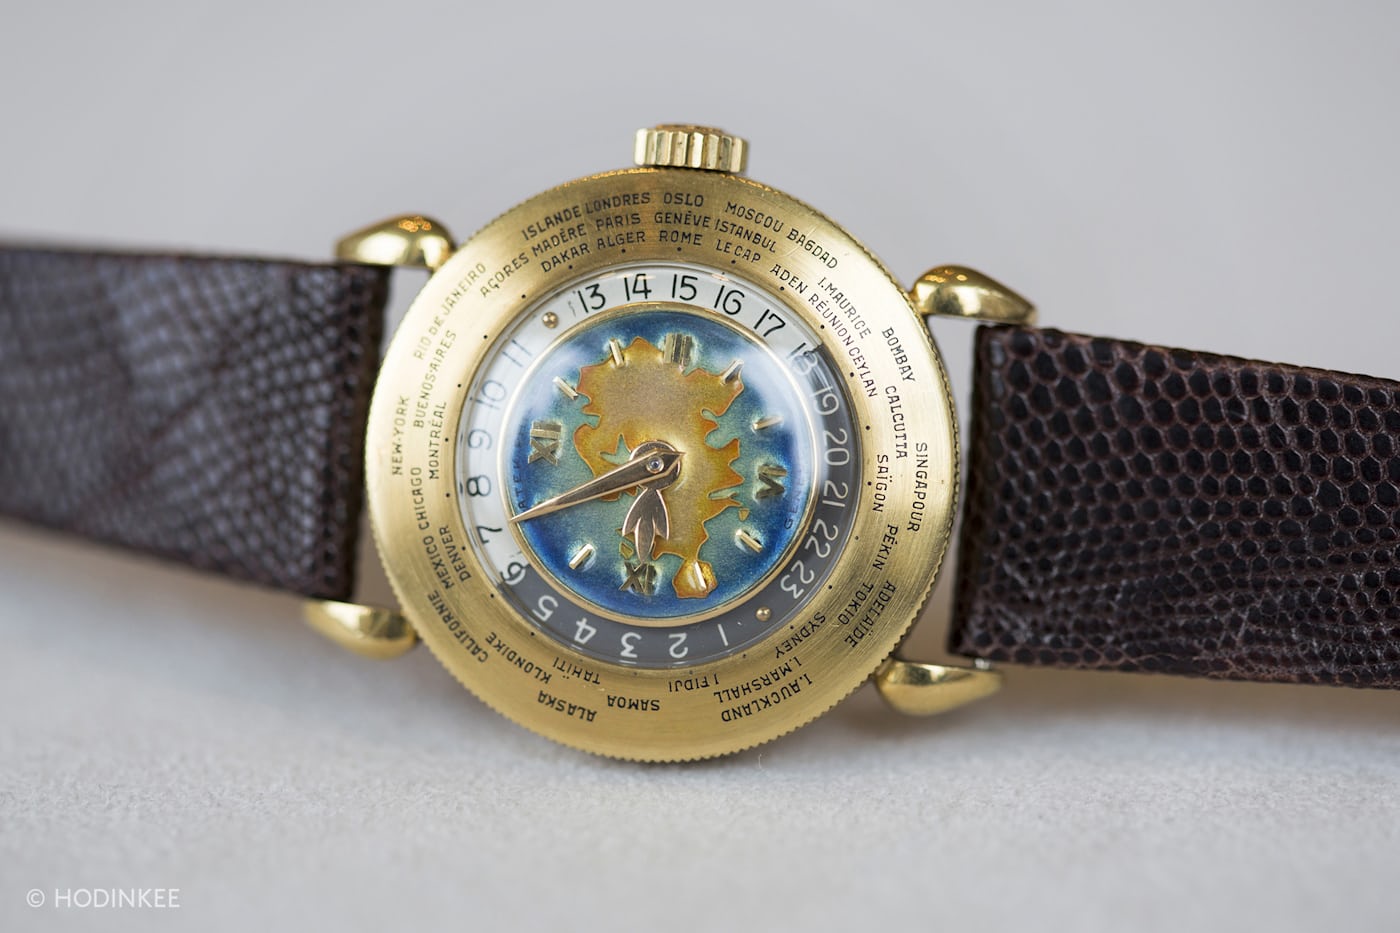 Four of Jean-Claude Biver's Patek Philippe watches fetch $8.76